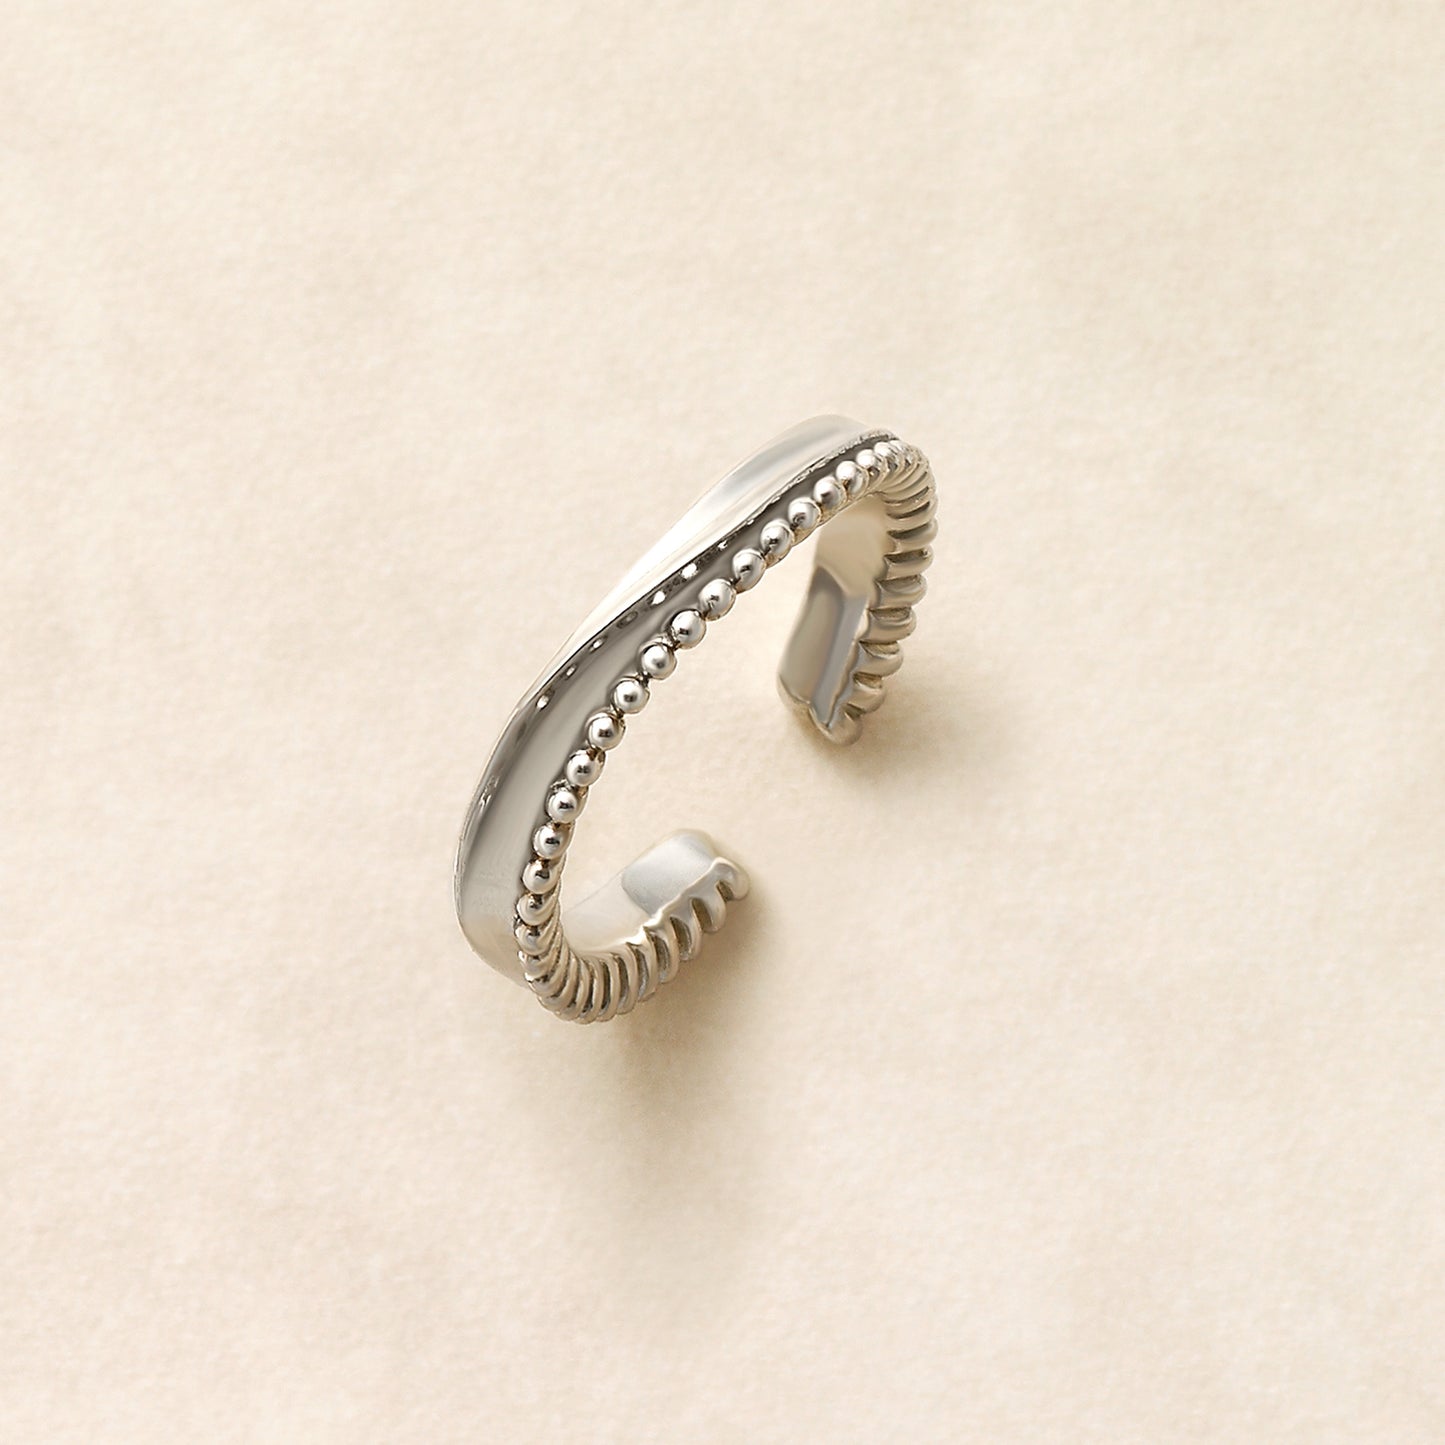 925 Sterling Silver Ear Cuff (Rhodium Plated) - Product Image